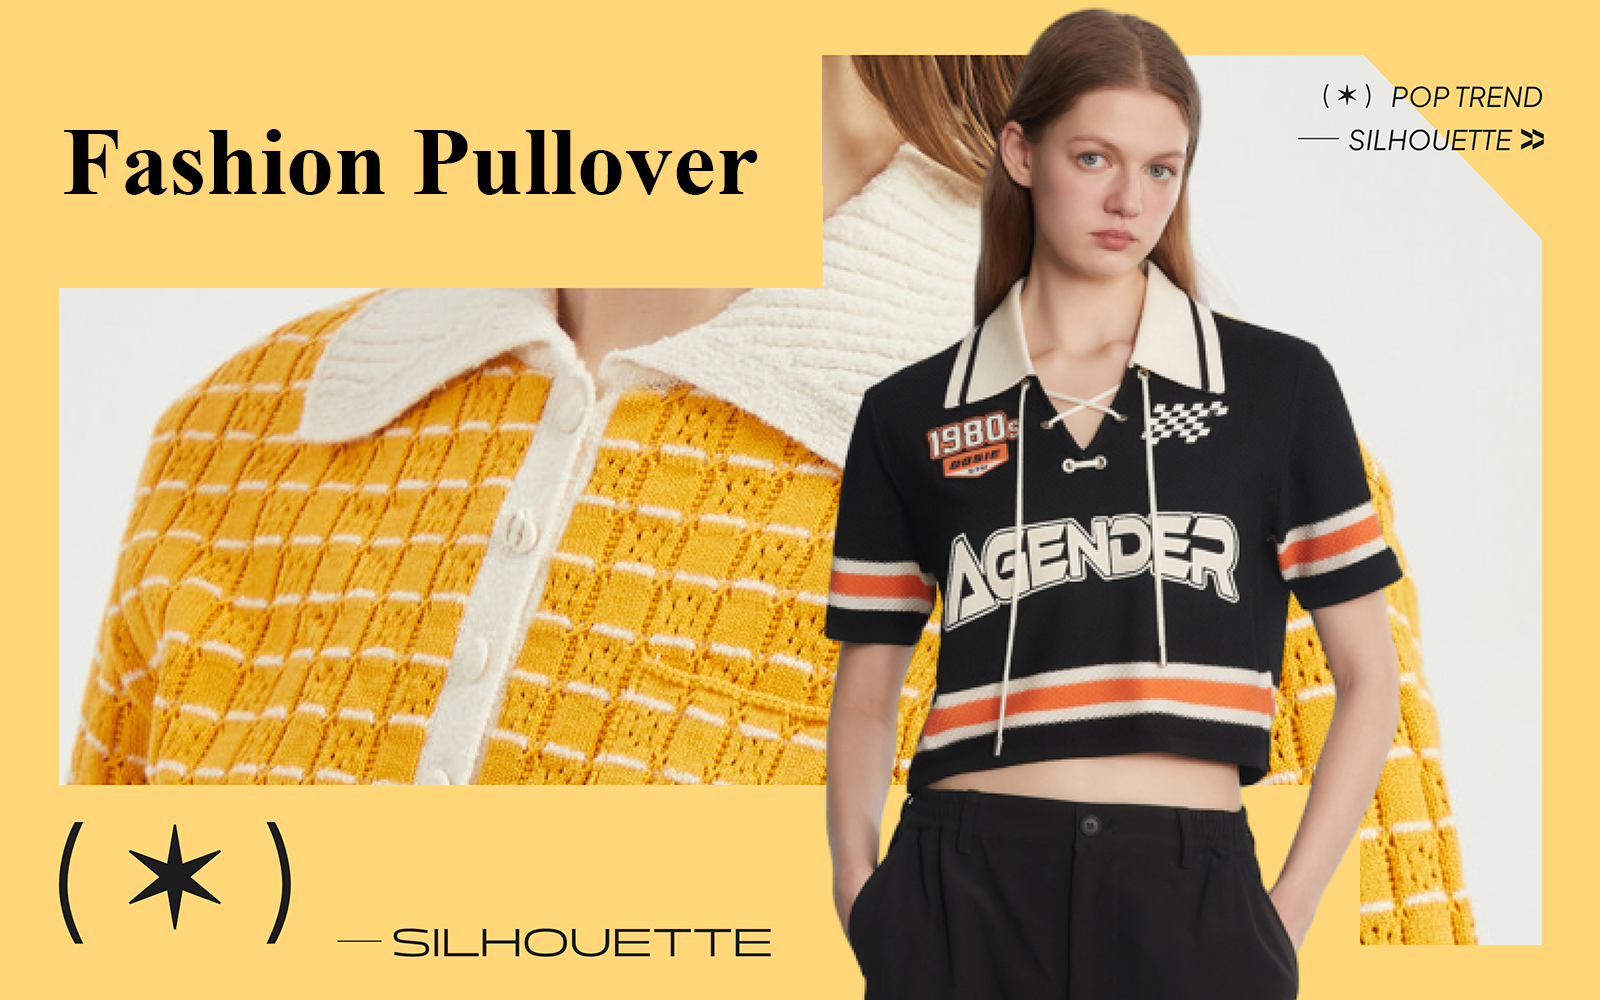 Fashion Pullover -- The Silhouette Trend for Women's Knitwear